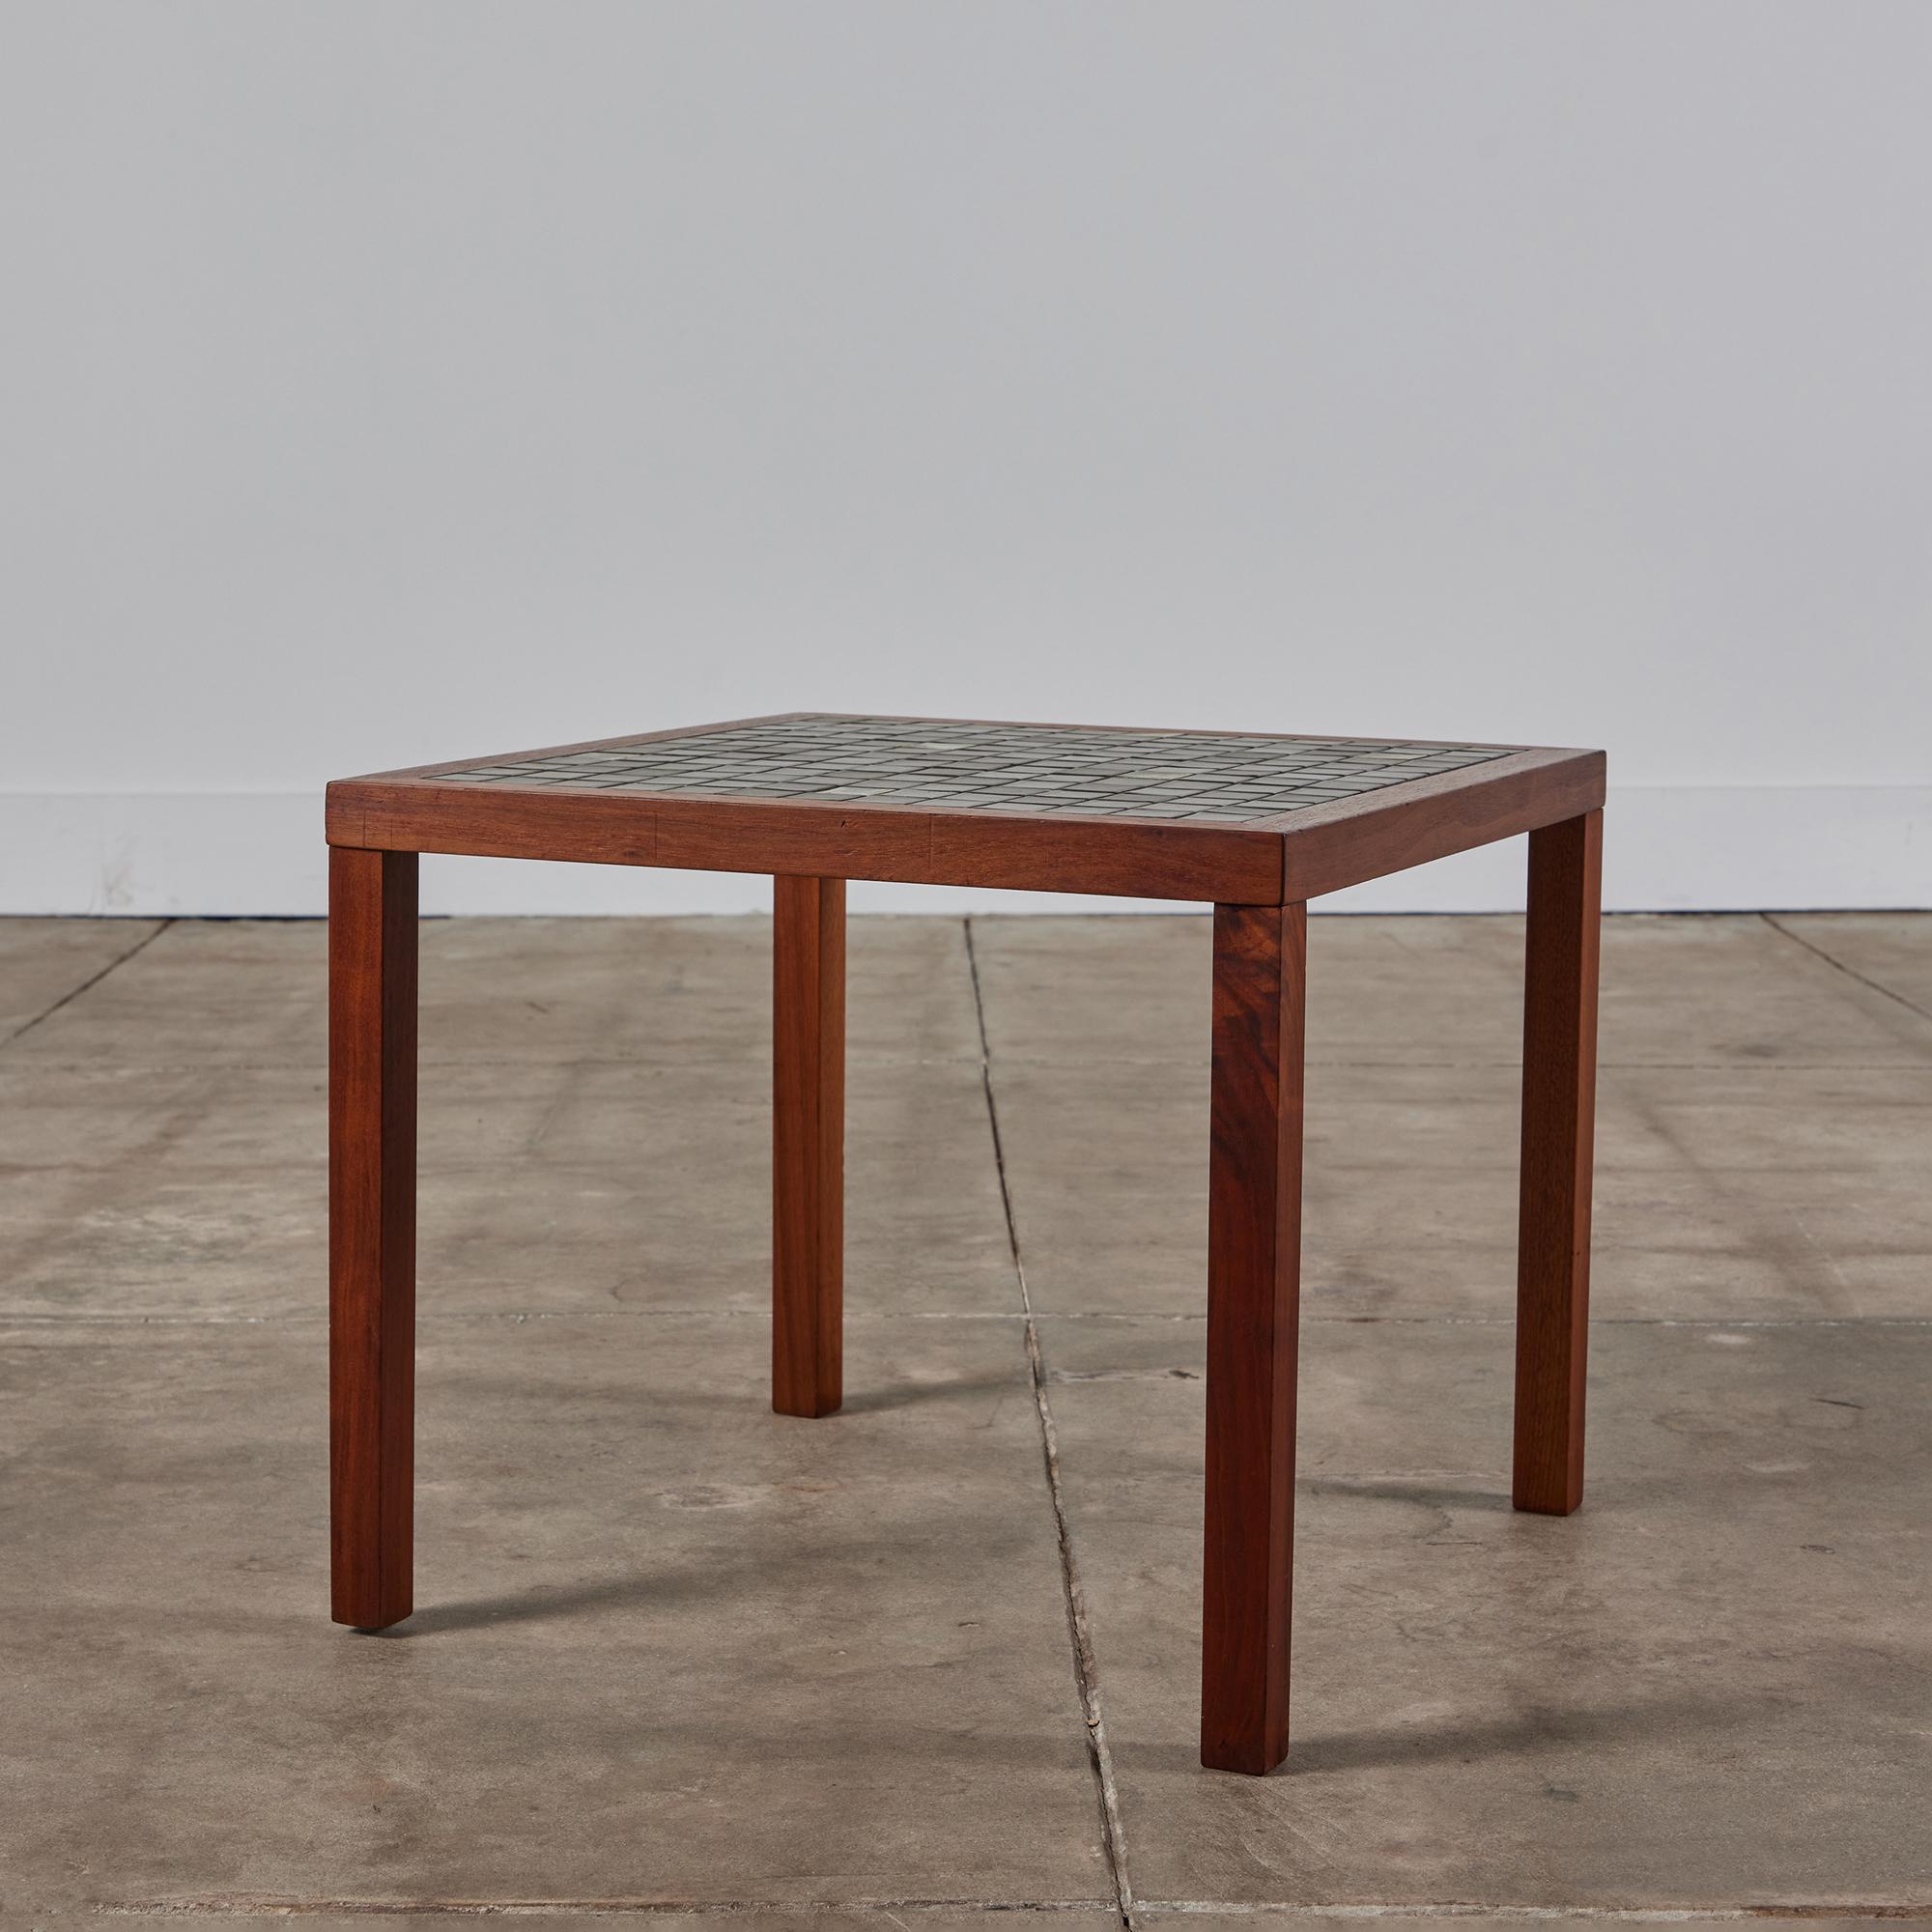 Square side table by Gordon & Jane Martz. The table top is inlaid with square ceramic tiles in dark gray with six cream, dark brown and green tiles placed randomly throughout the table. The frame of the table and four legs are solid